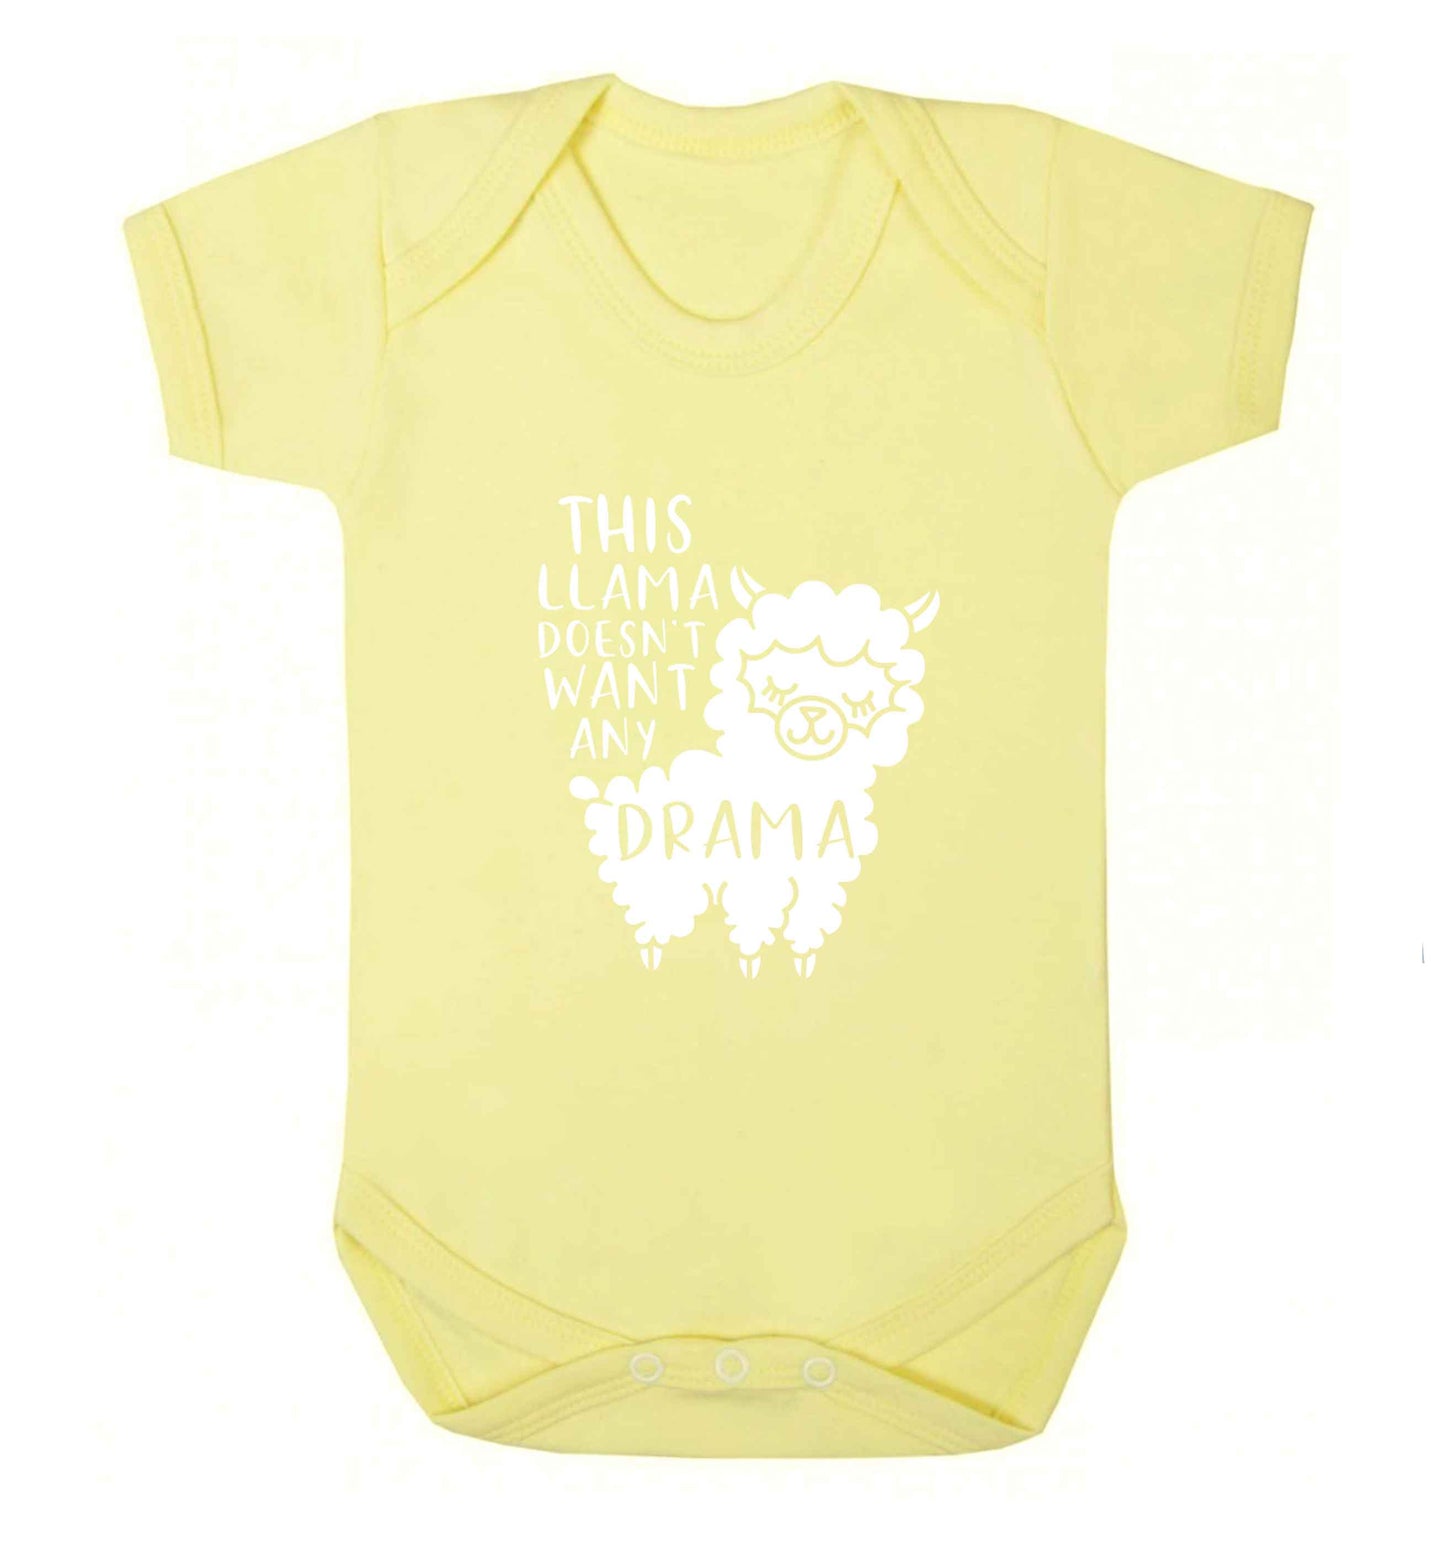 This Llama doesn't want any drama baby vest pale yellow 18-24 months